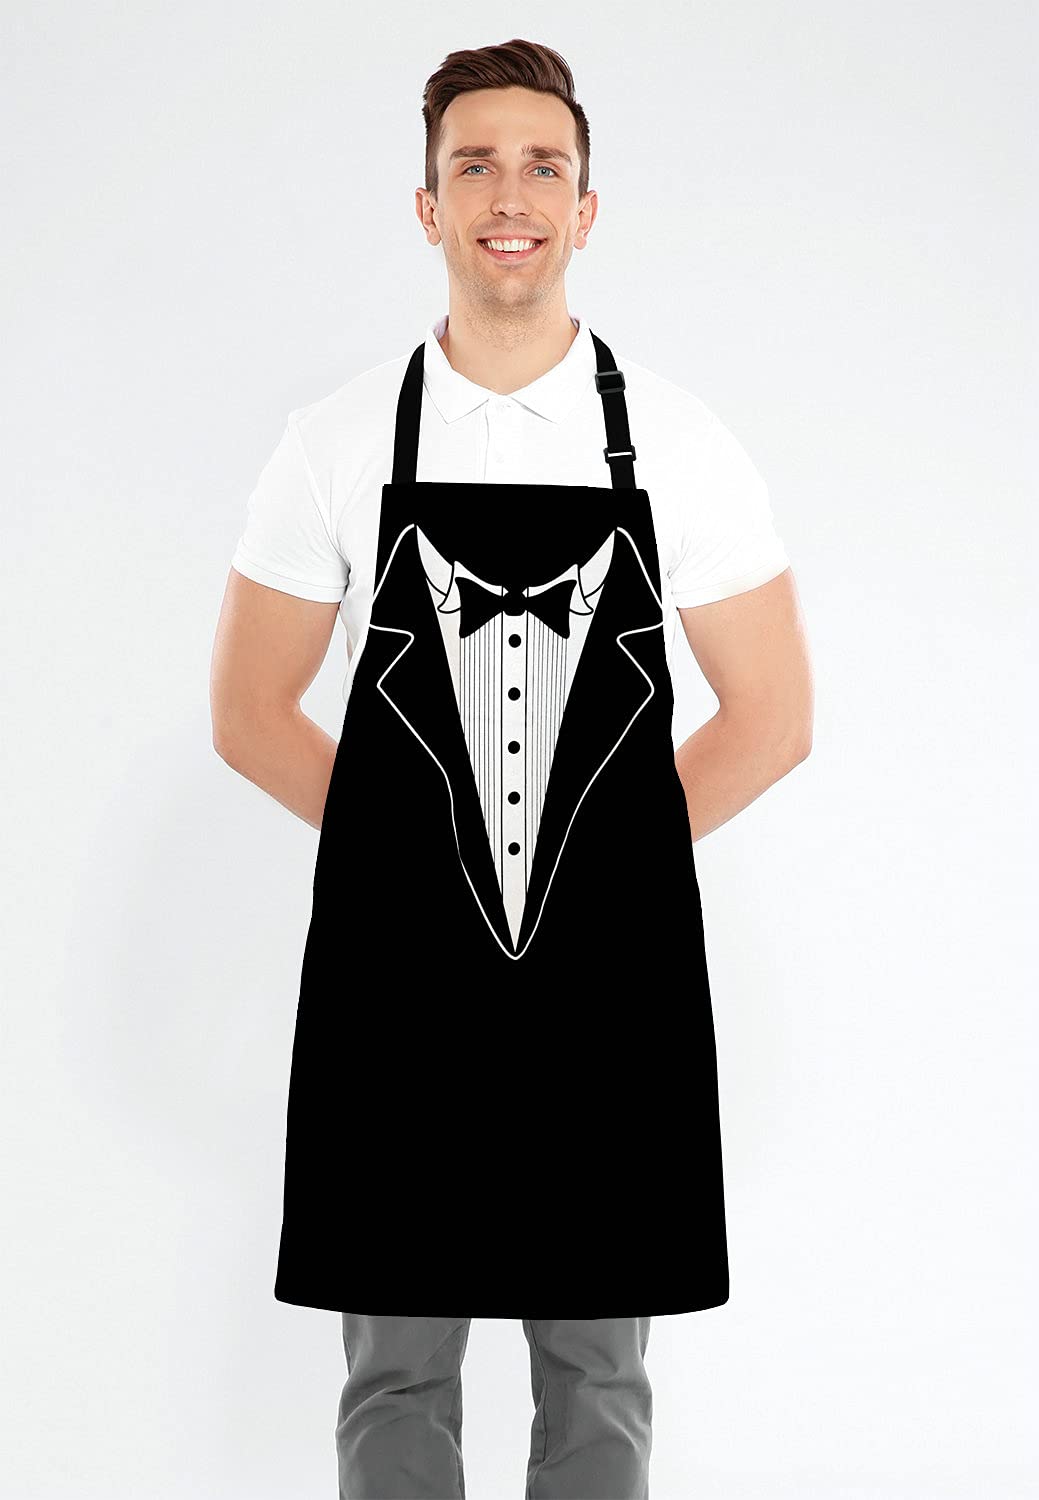 Lefolen Funny BBQ Apron Grilling Gift - Novelty Fathers Day Grilling Gift - BBQ Tuxedo Waistcoat - Barbecue Grill Gift For Men